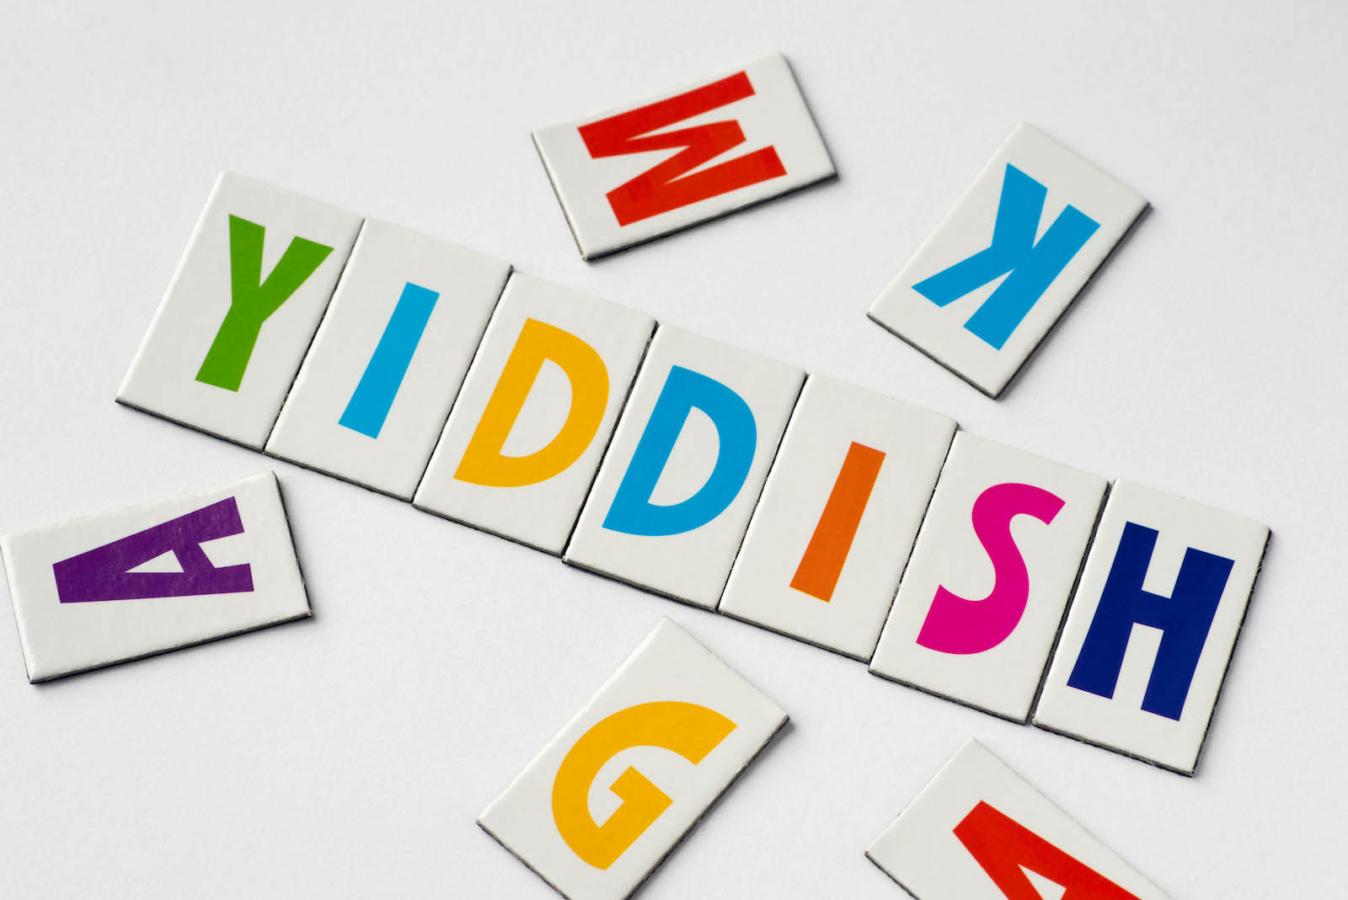 yiddish spelled out in colorful letters